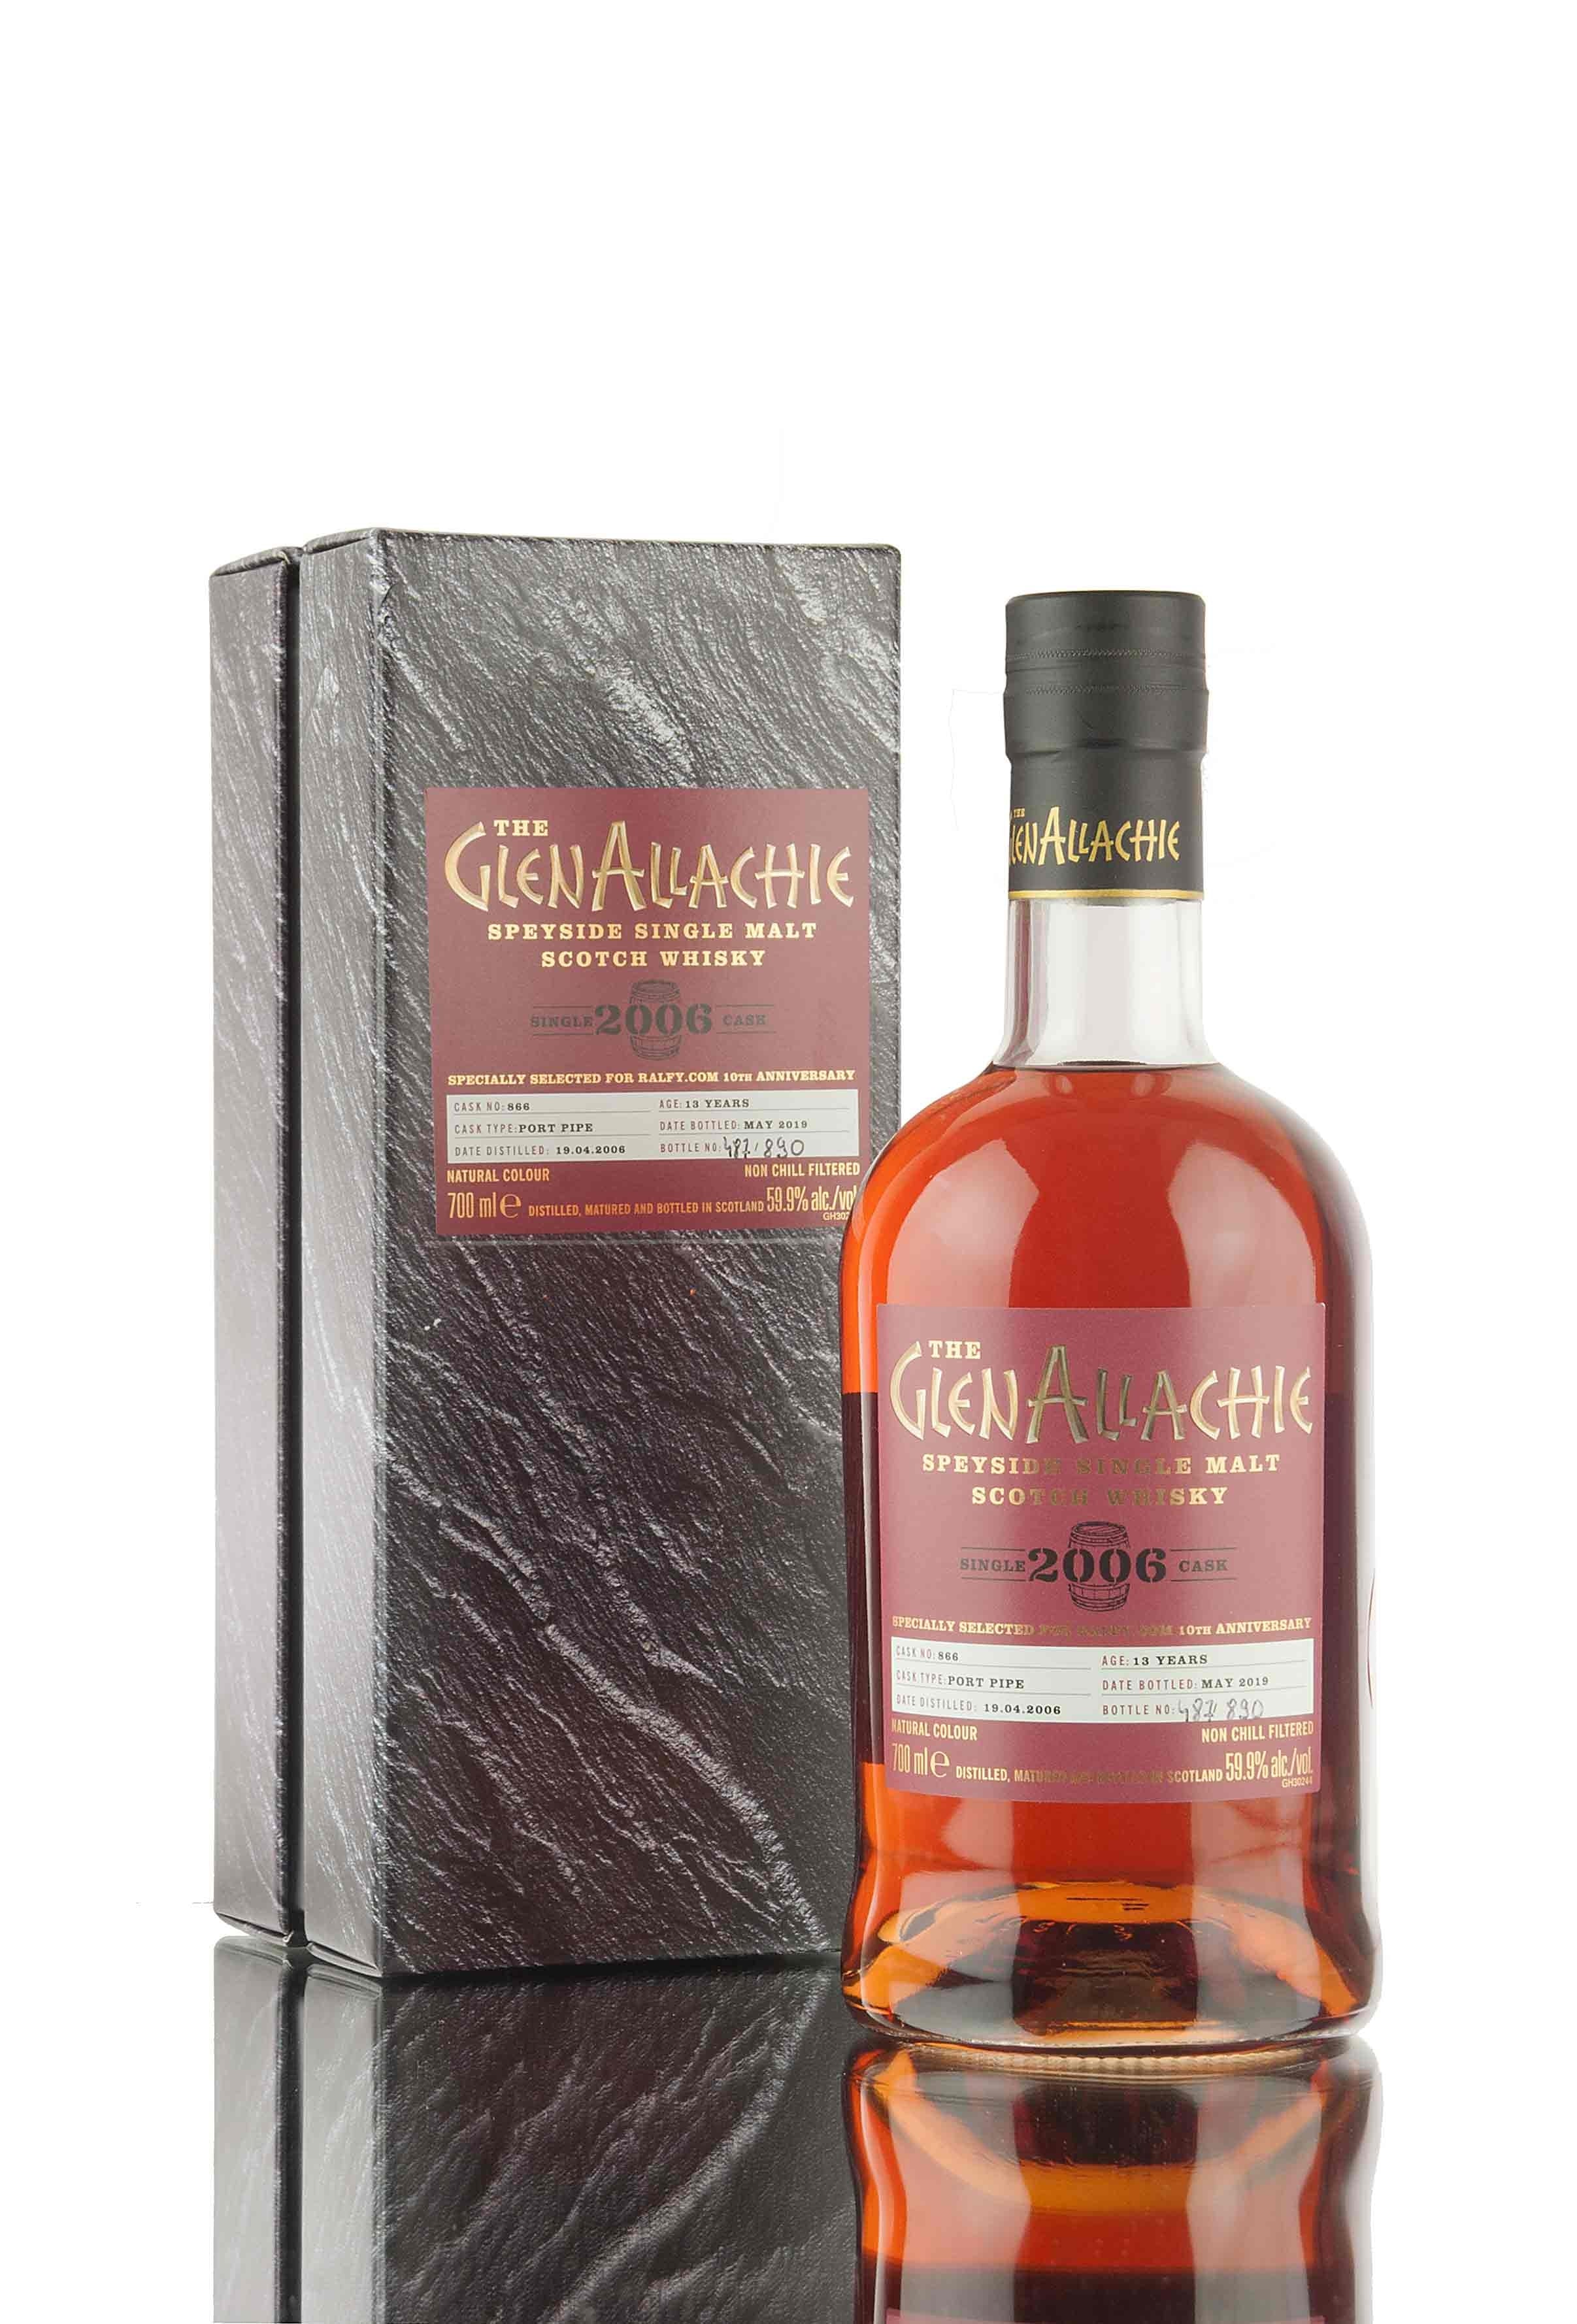 GlenAllachie 13 Year Old - 2006 | Ralfy.com 10th Anniversary